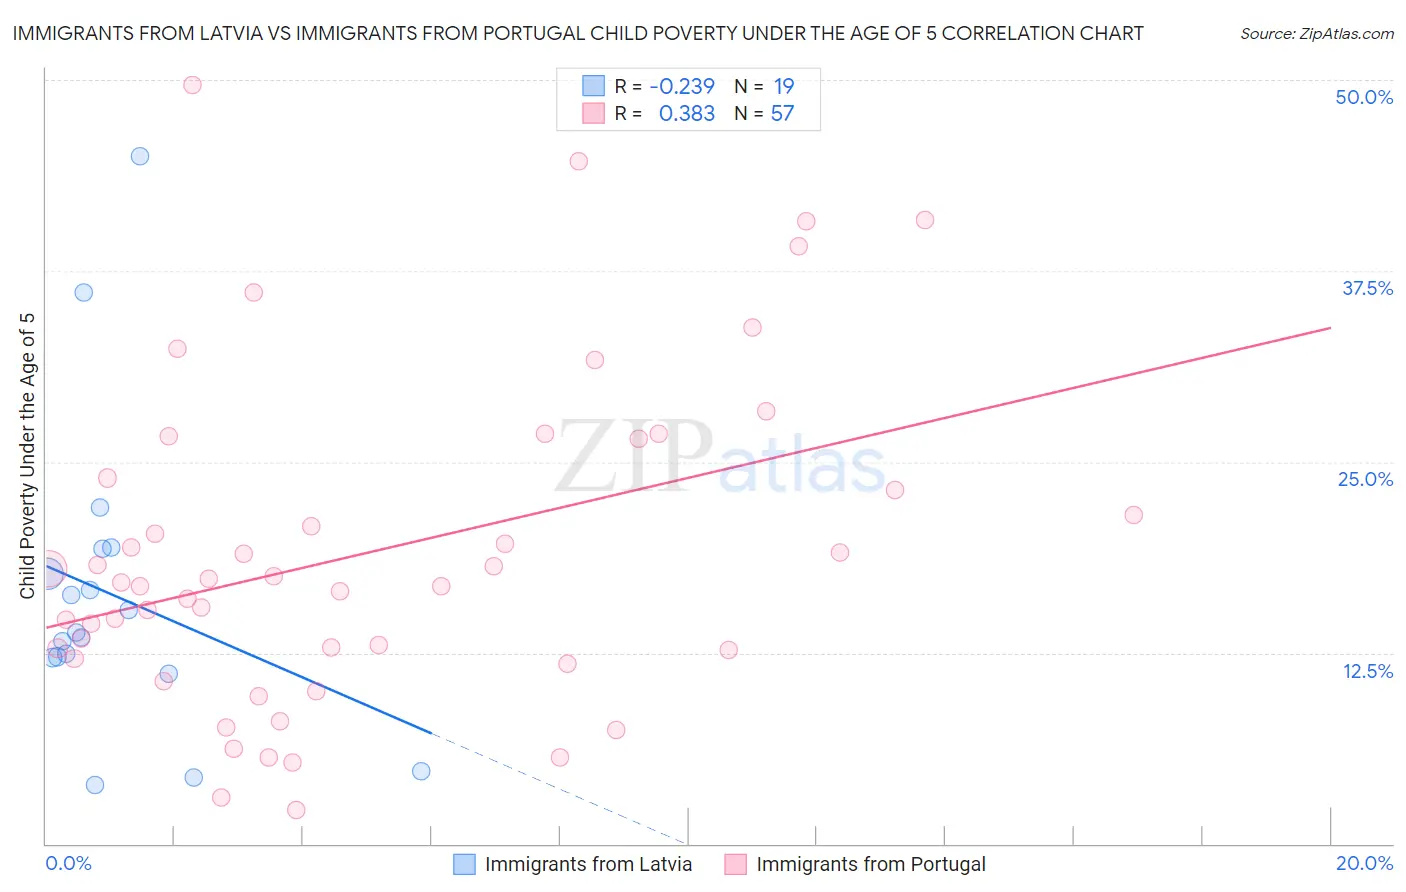 Immigrants from Latvia vs Immigrants from Portugal Child Poverty Under the Age of 5